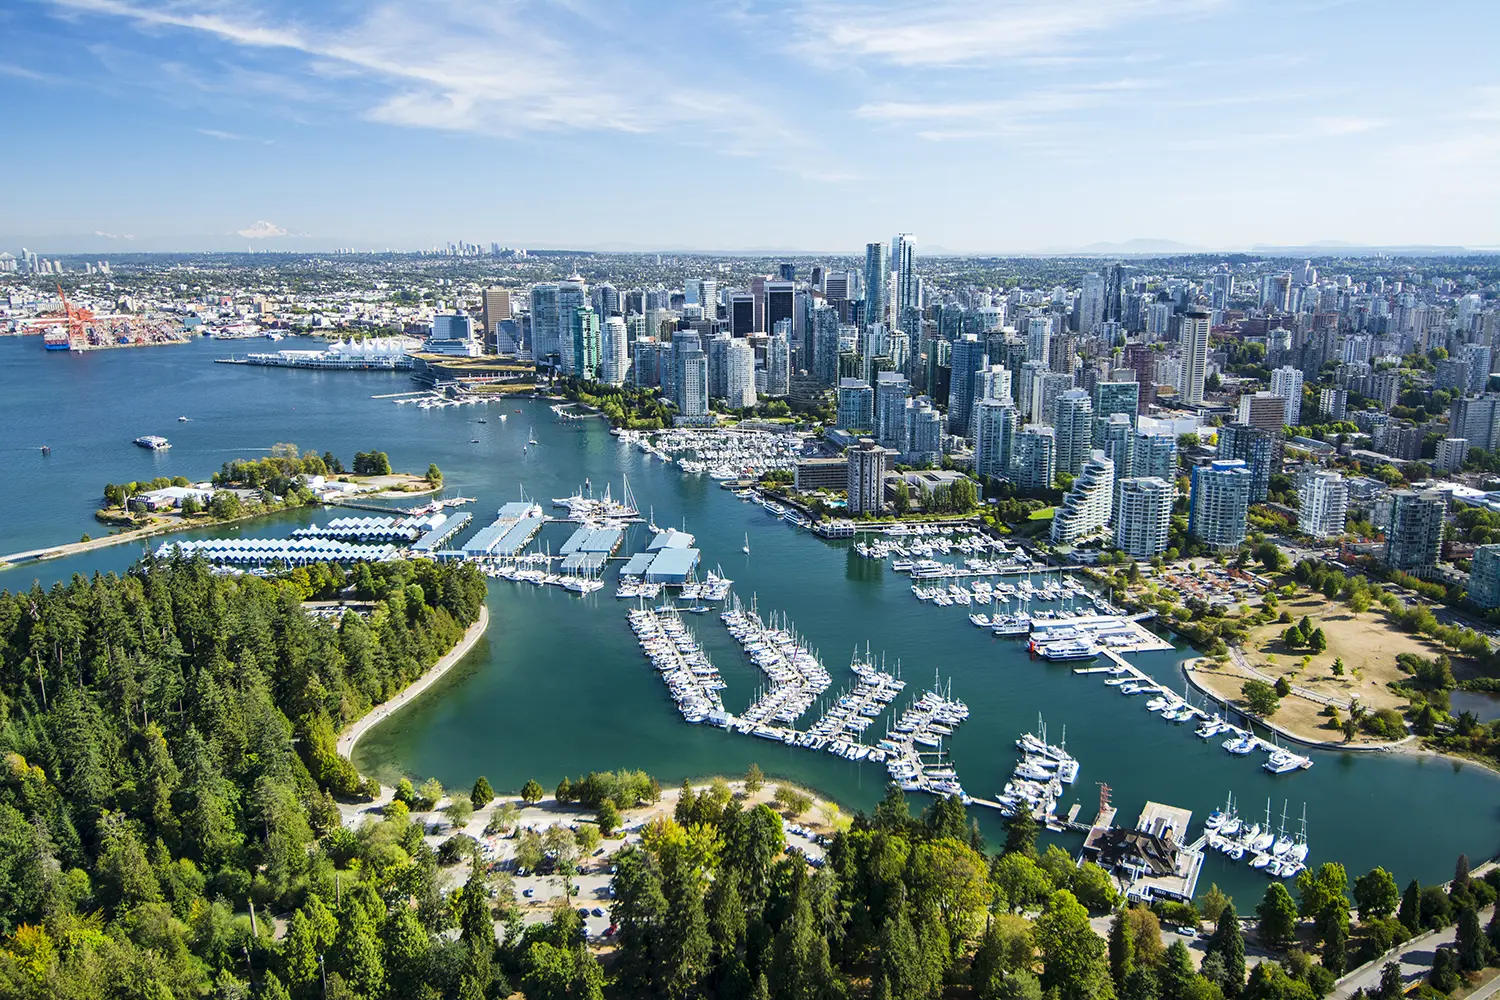 An aerial image of Coal Harbor and Vancouver, BC